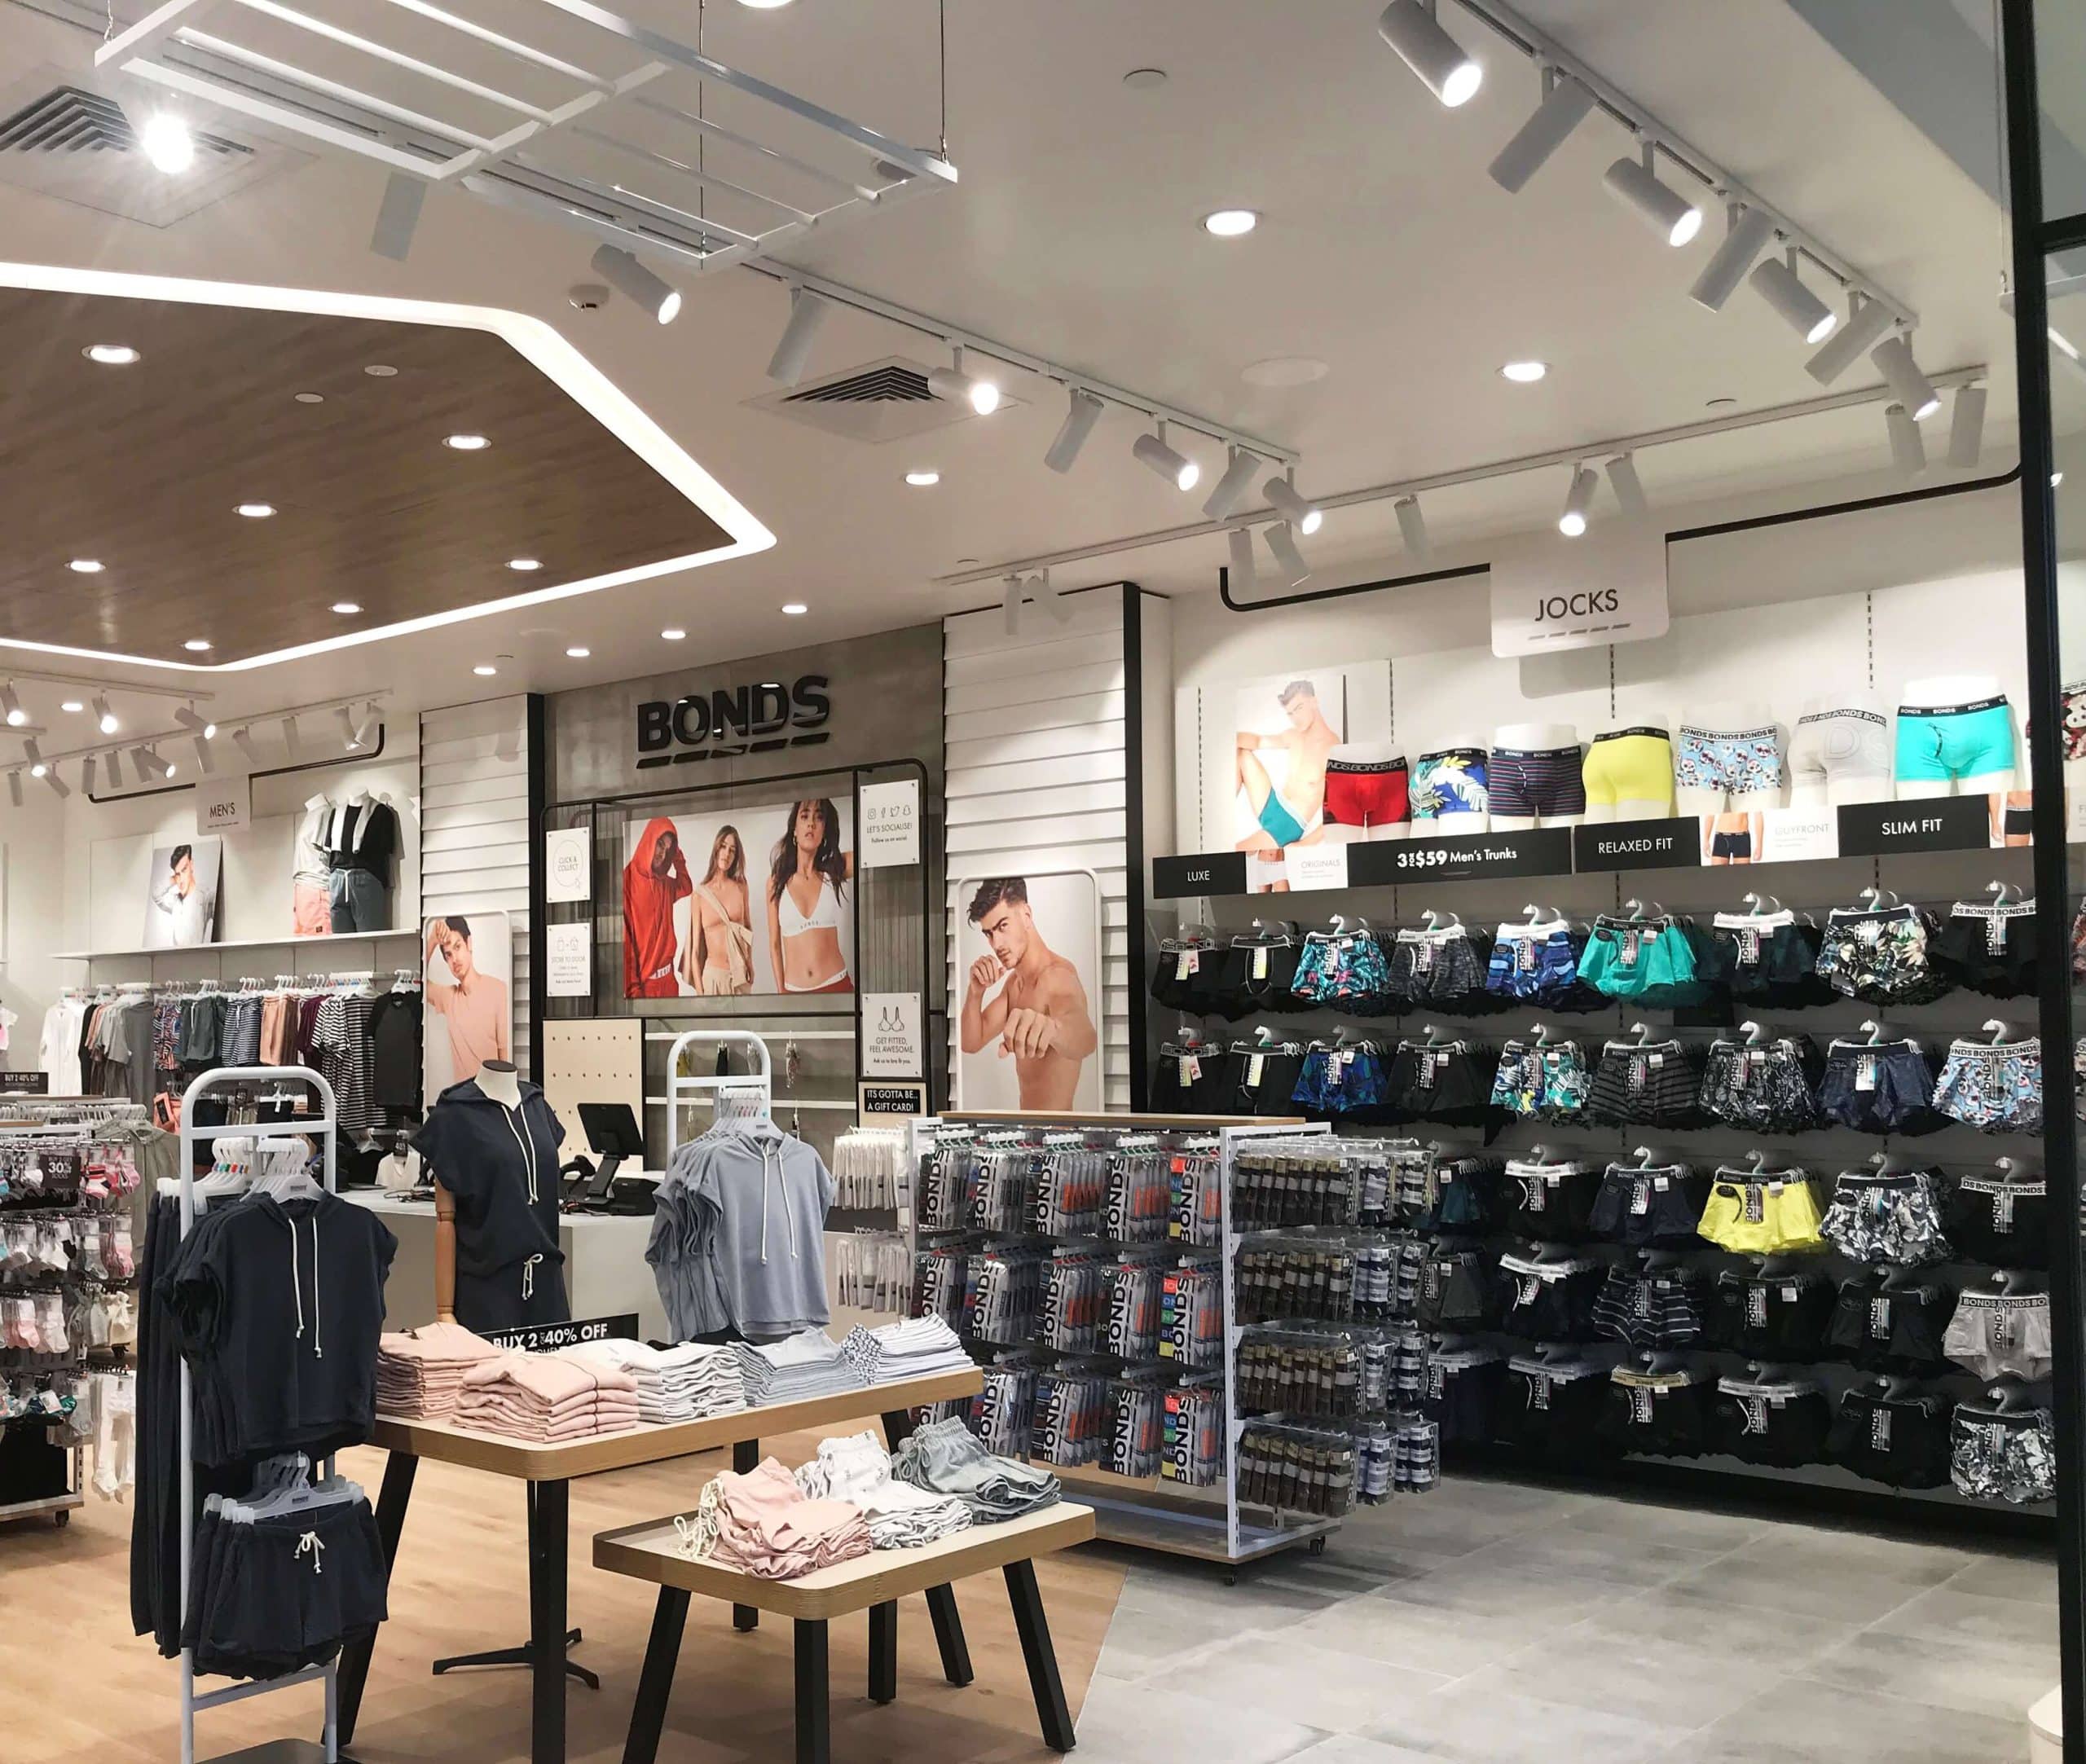 image of right lighting design in retail environment